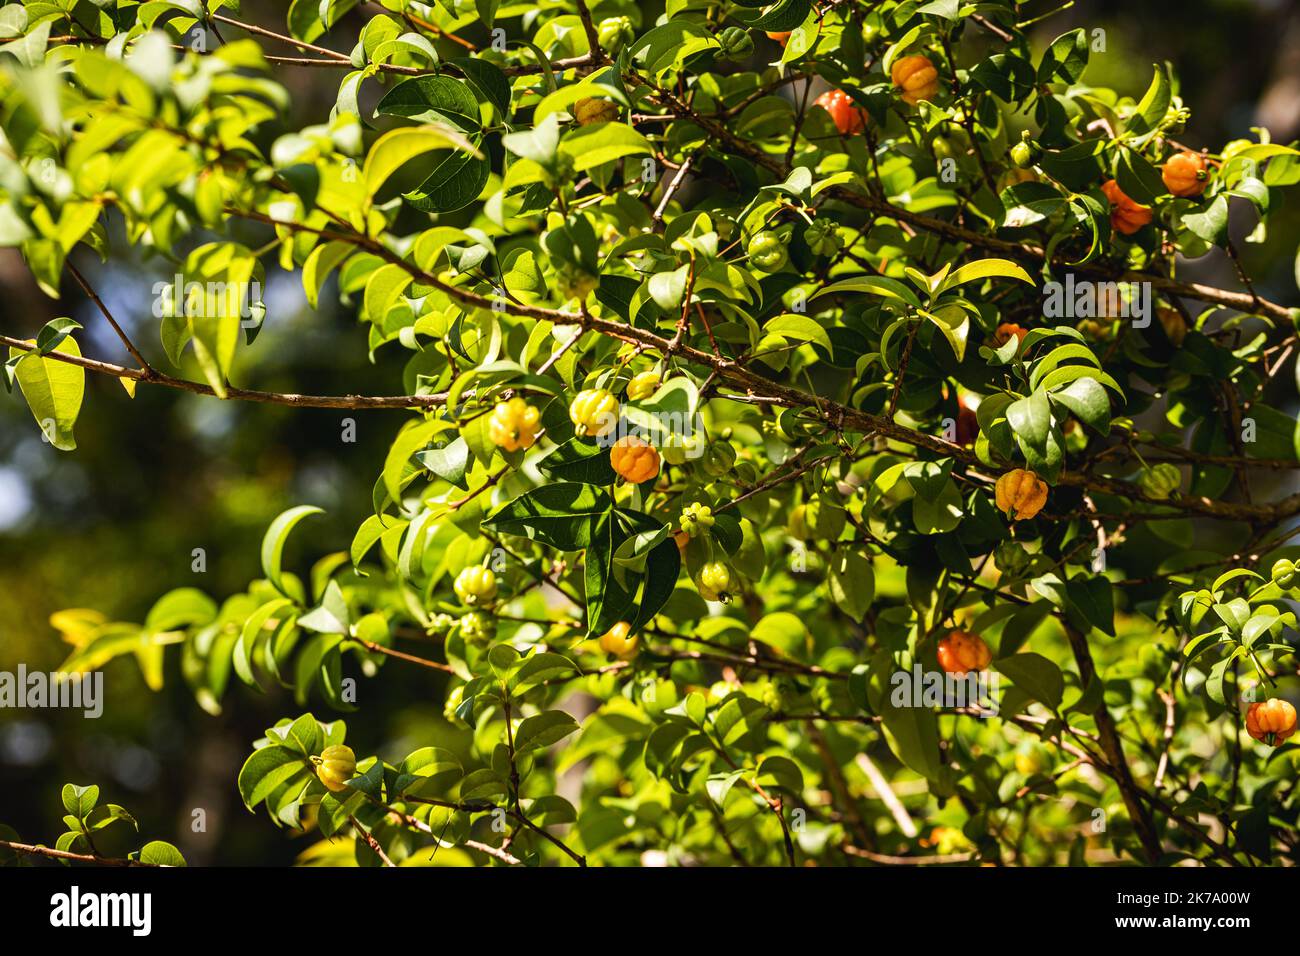 pitangueira, fruit tree or shrub, native to the Atlantic Forest and known mainly for its sweet fruits. Brazilian cherry, fruit from Brazil Stock Photo